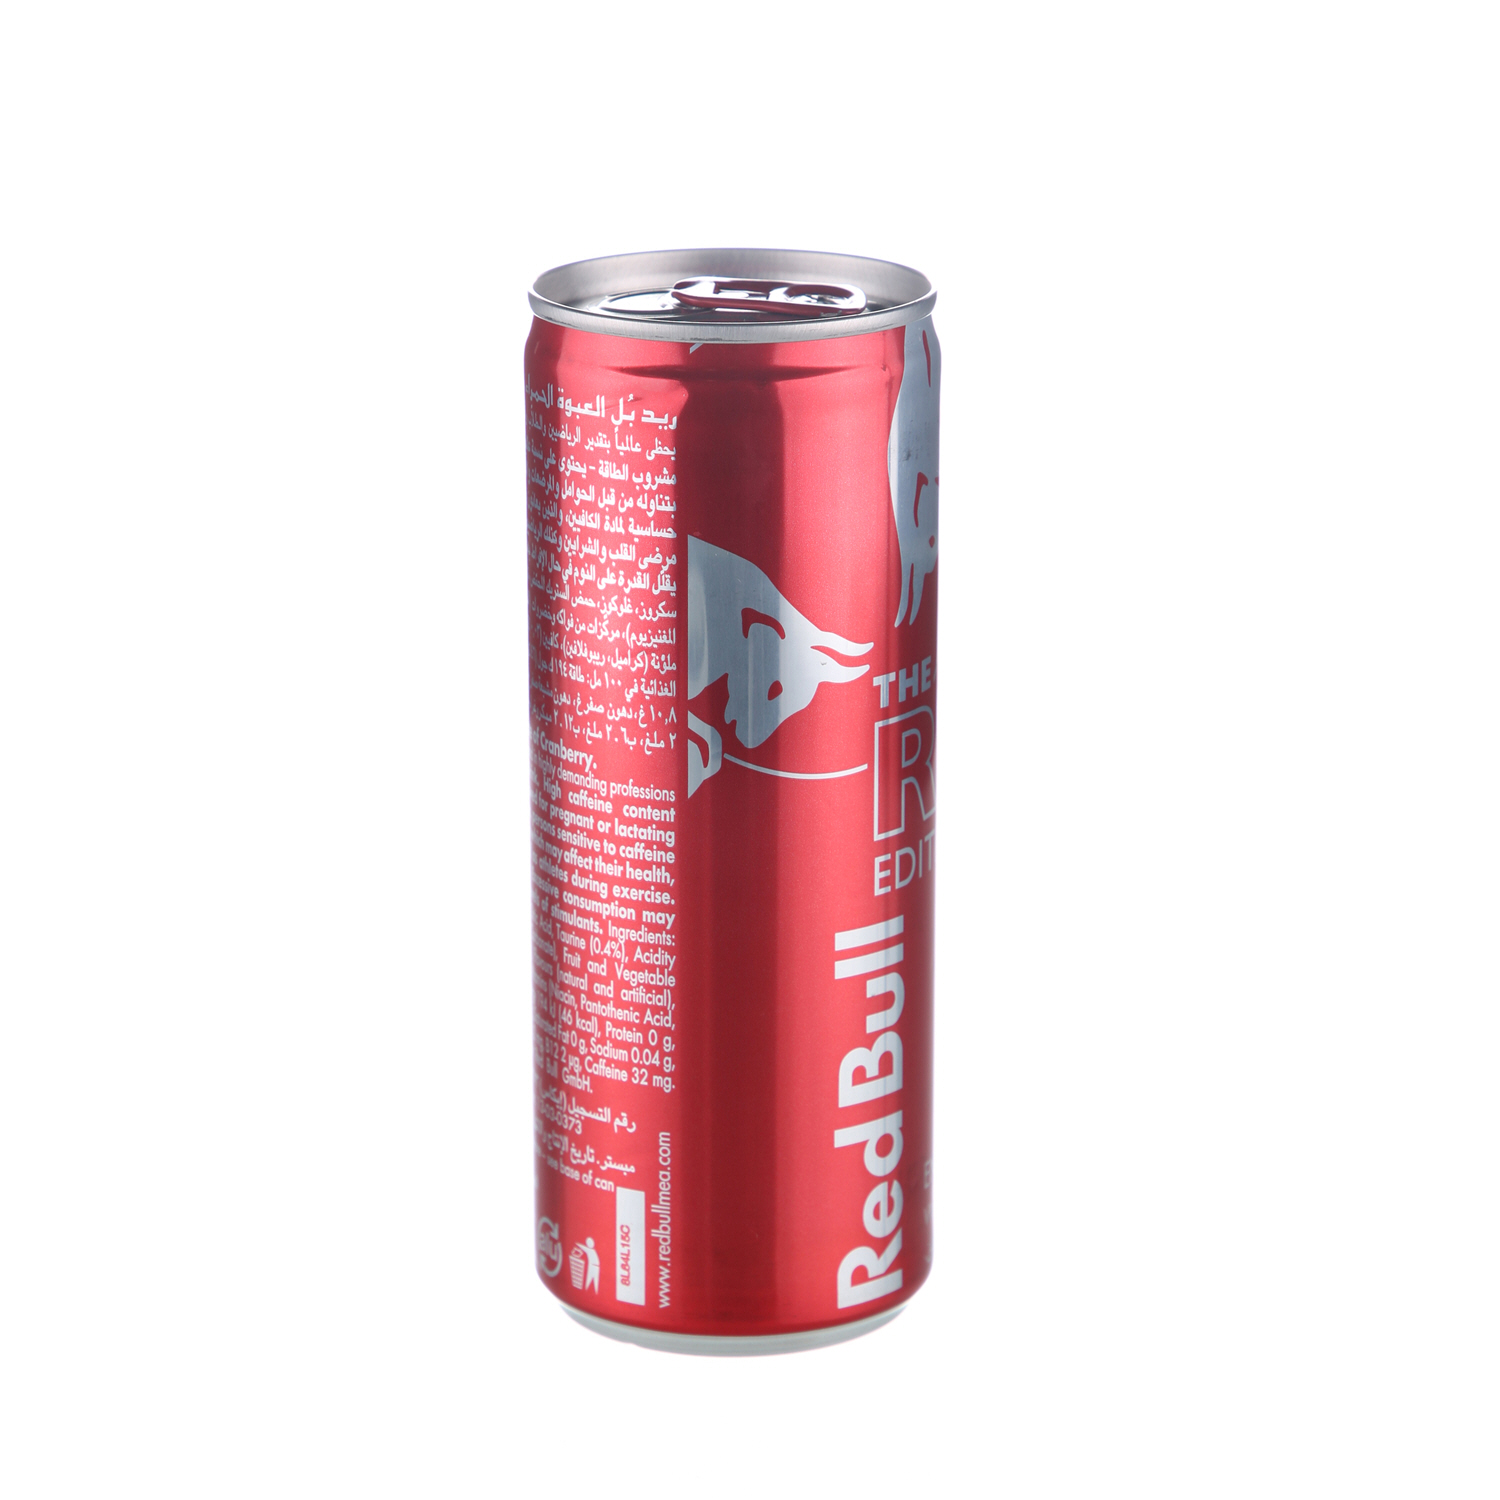 Red Bull Red Edition 250ml